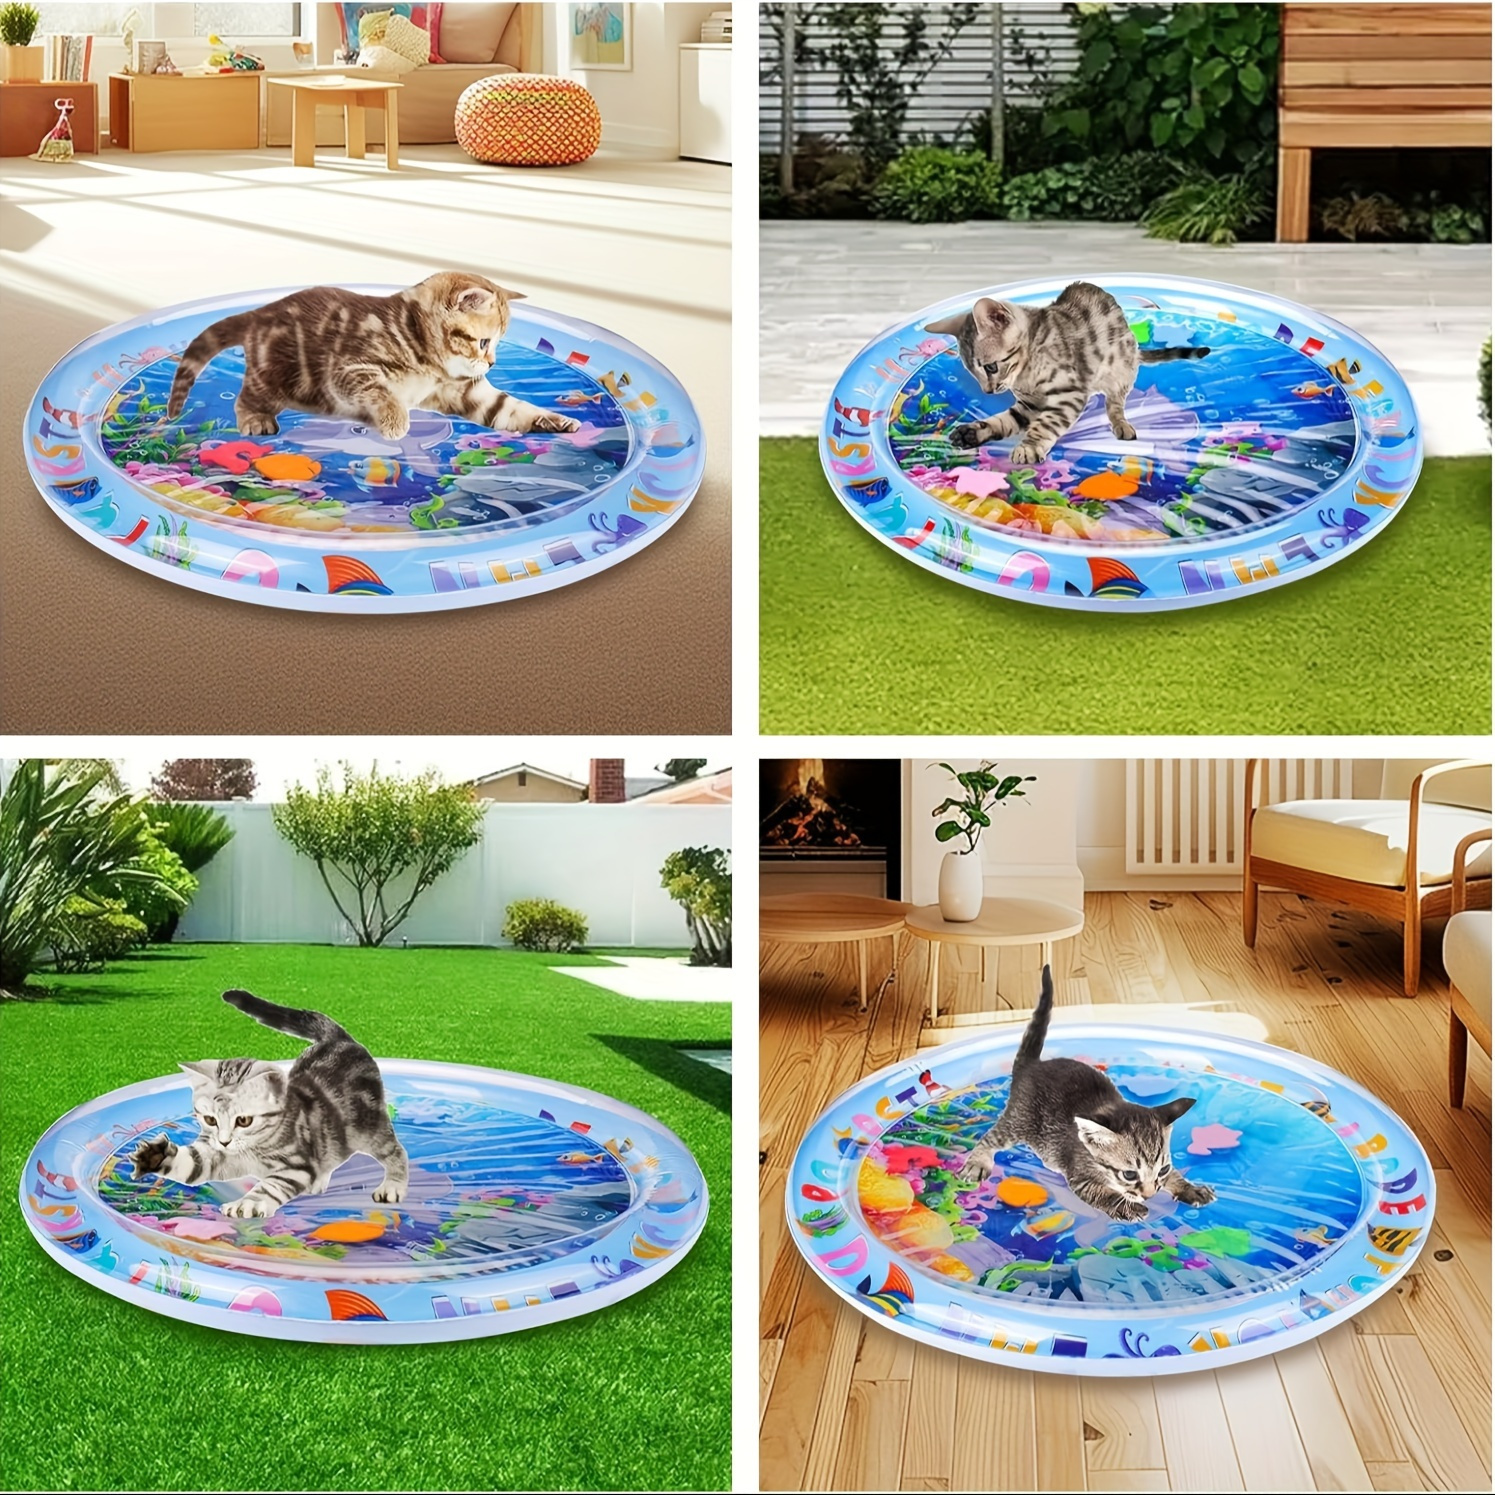 

Interactive Water Sensory Cat Play Mat With Floating Fish Design, Splash-proof Pvc Kitten Kick Toy For Indoor Cats, Boredom Cartoon Pattern Pet Activity Pad, Uses Tap Water